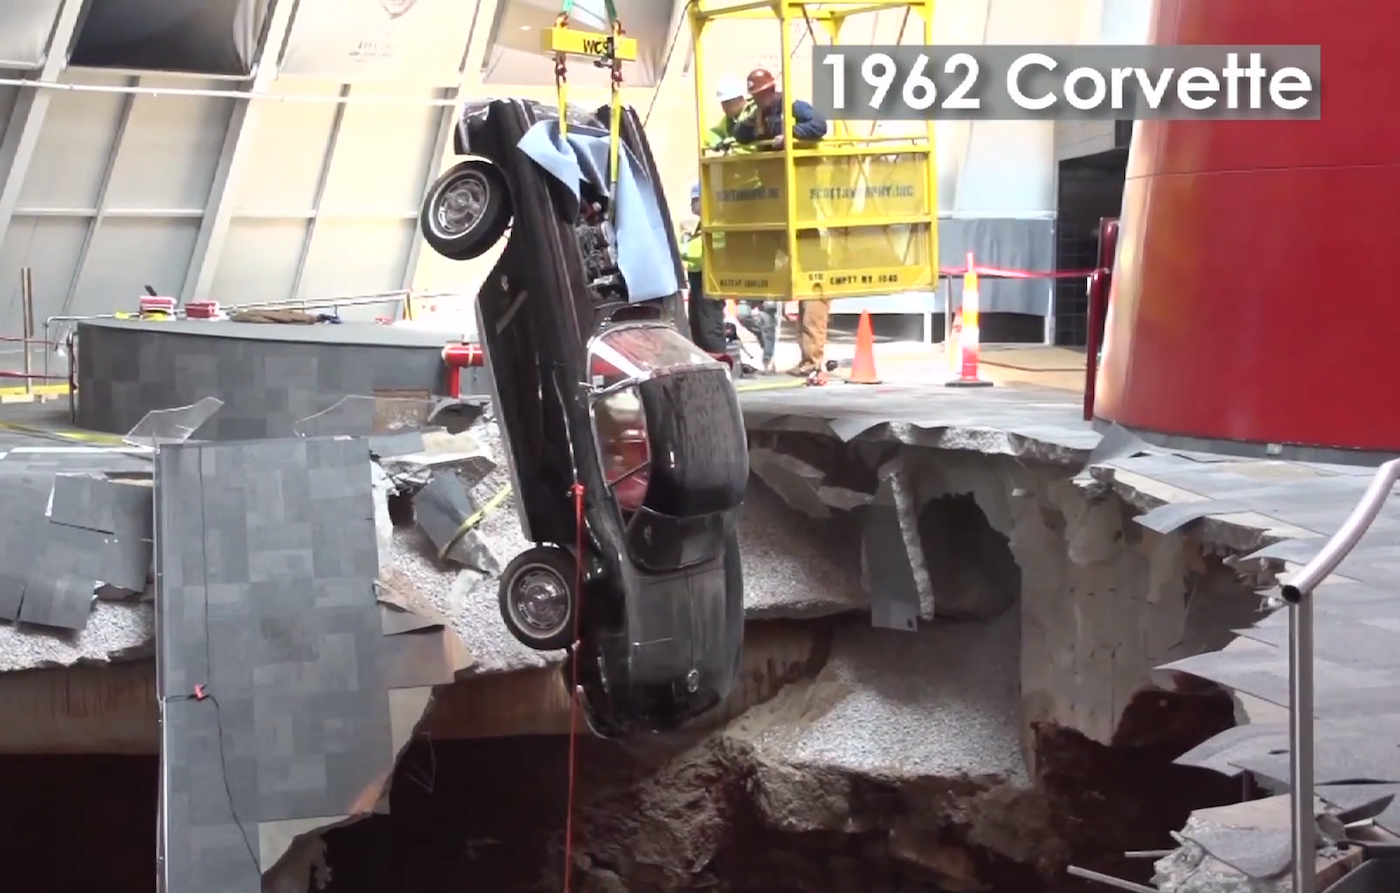 Behind-The-Scenes: The Corvette Recovery At The National Corvette Museum